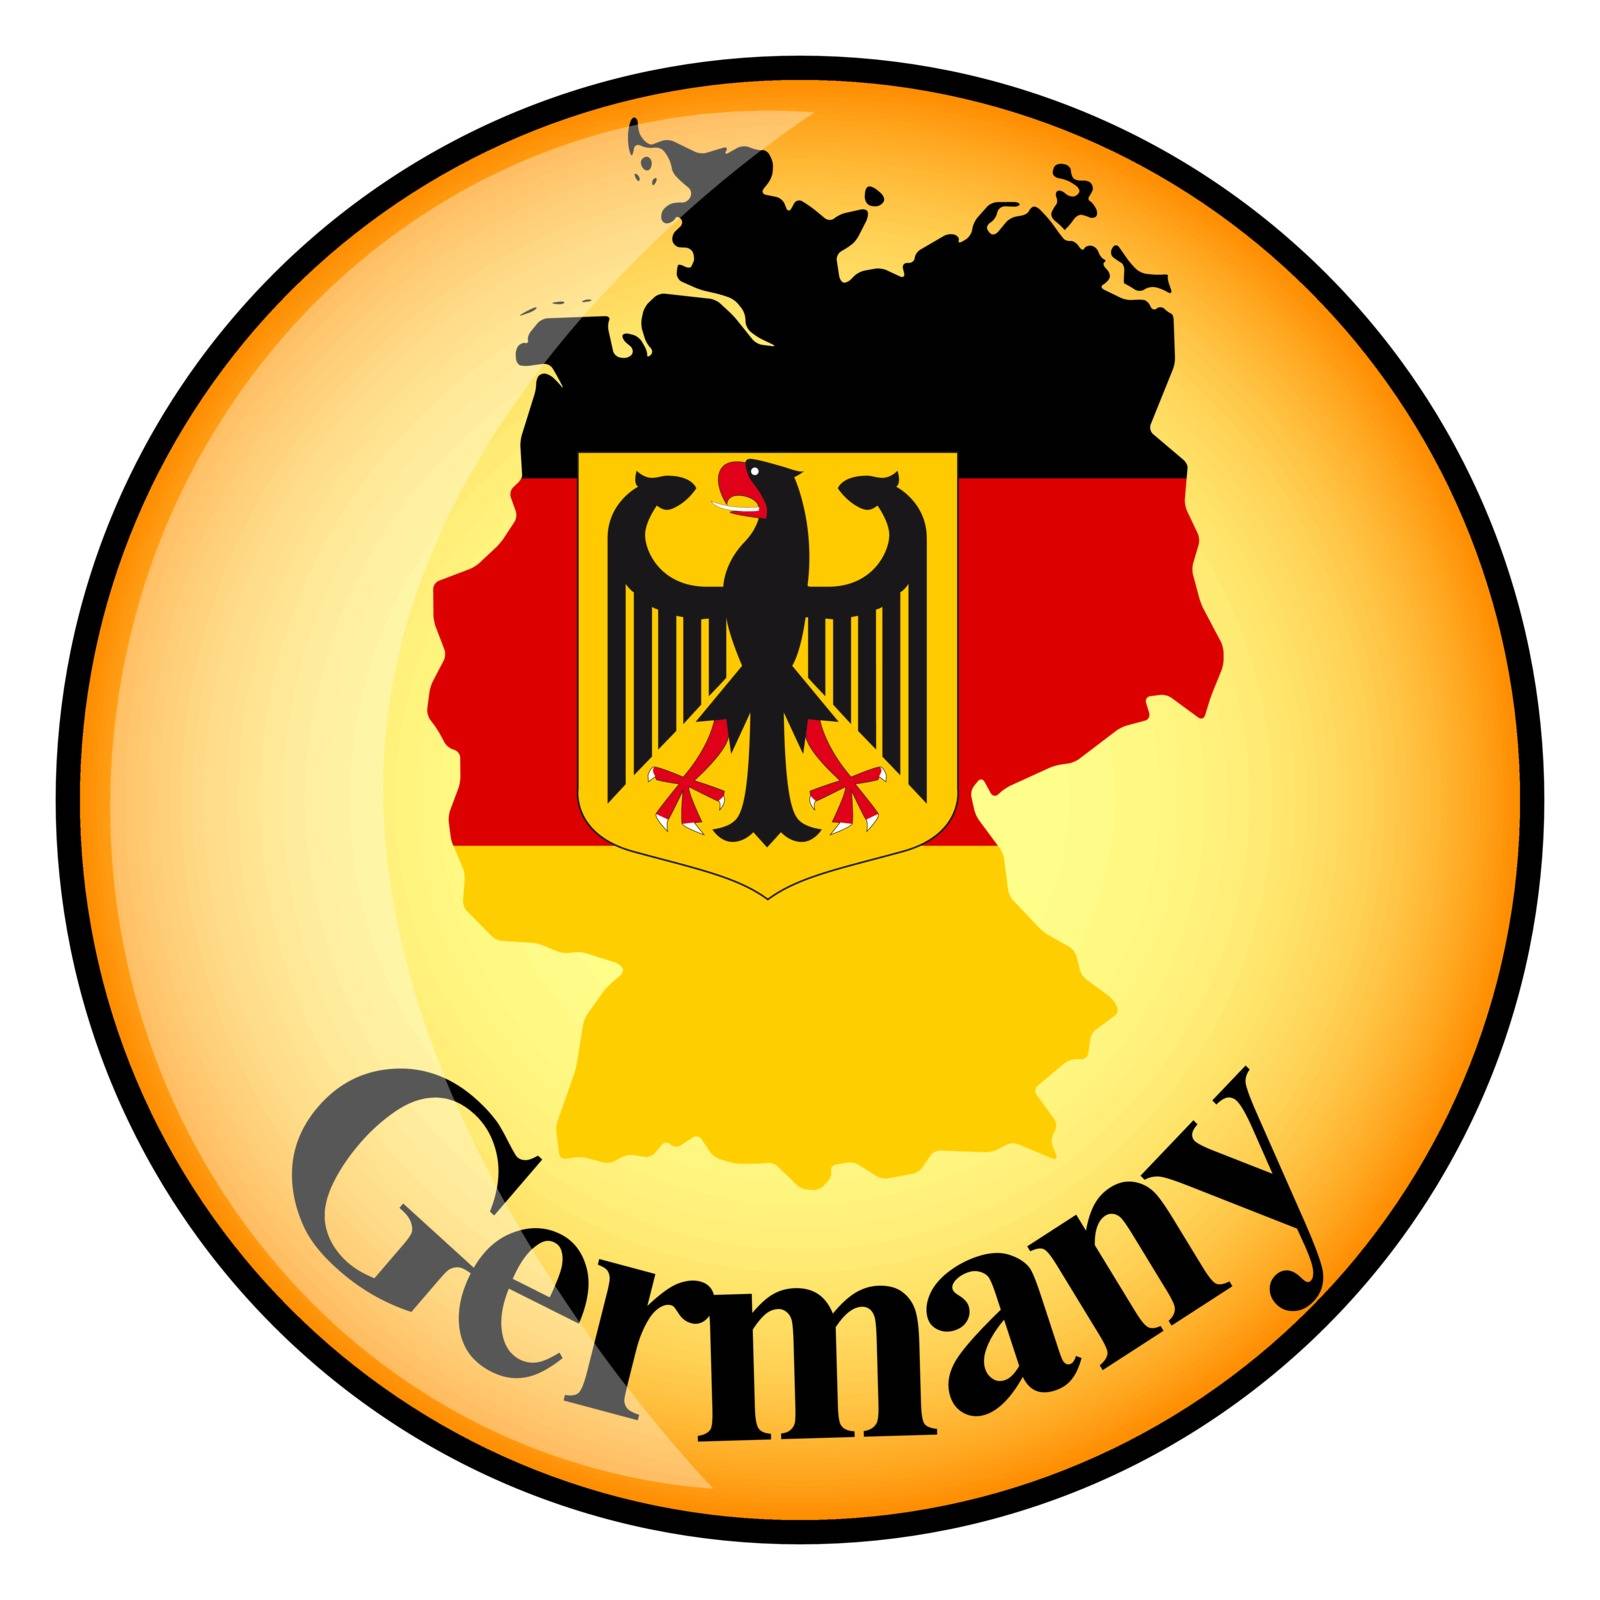 orange button with the image maps of button Germany in the form of national flag
